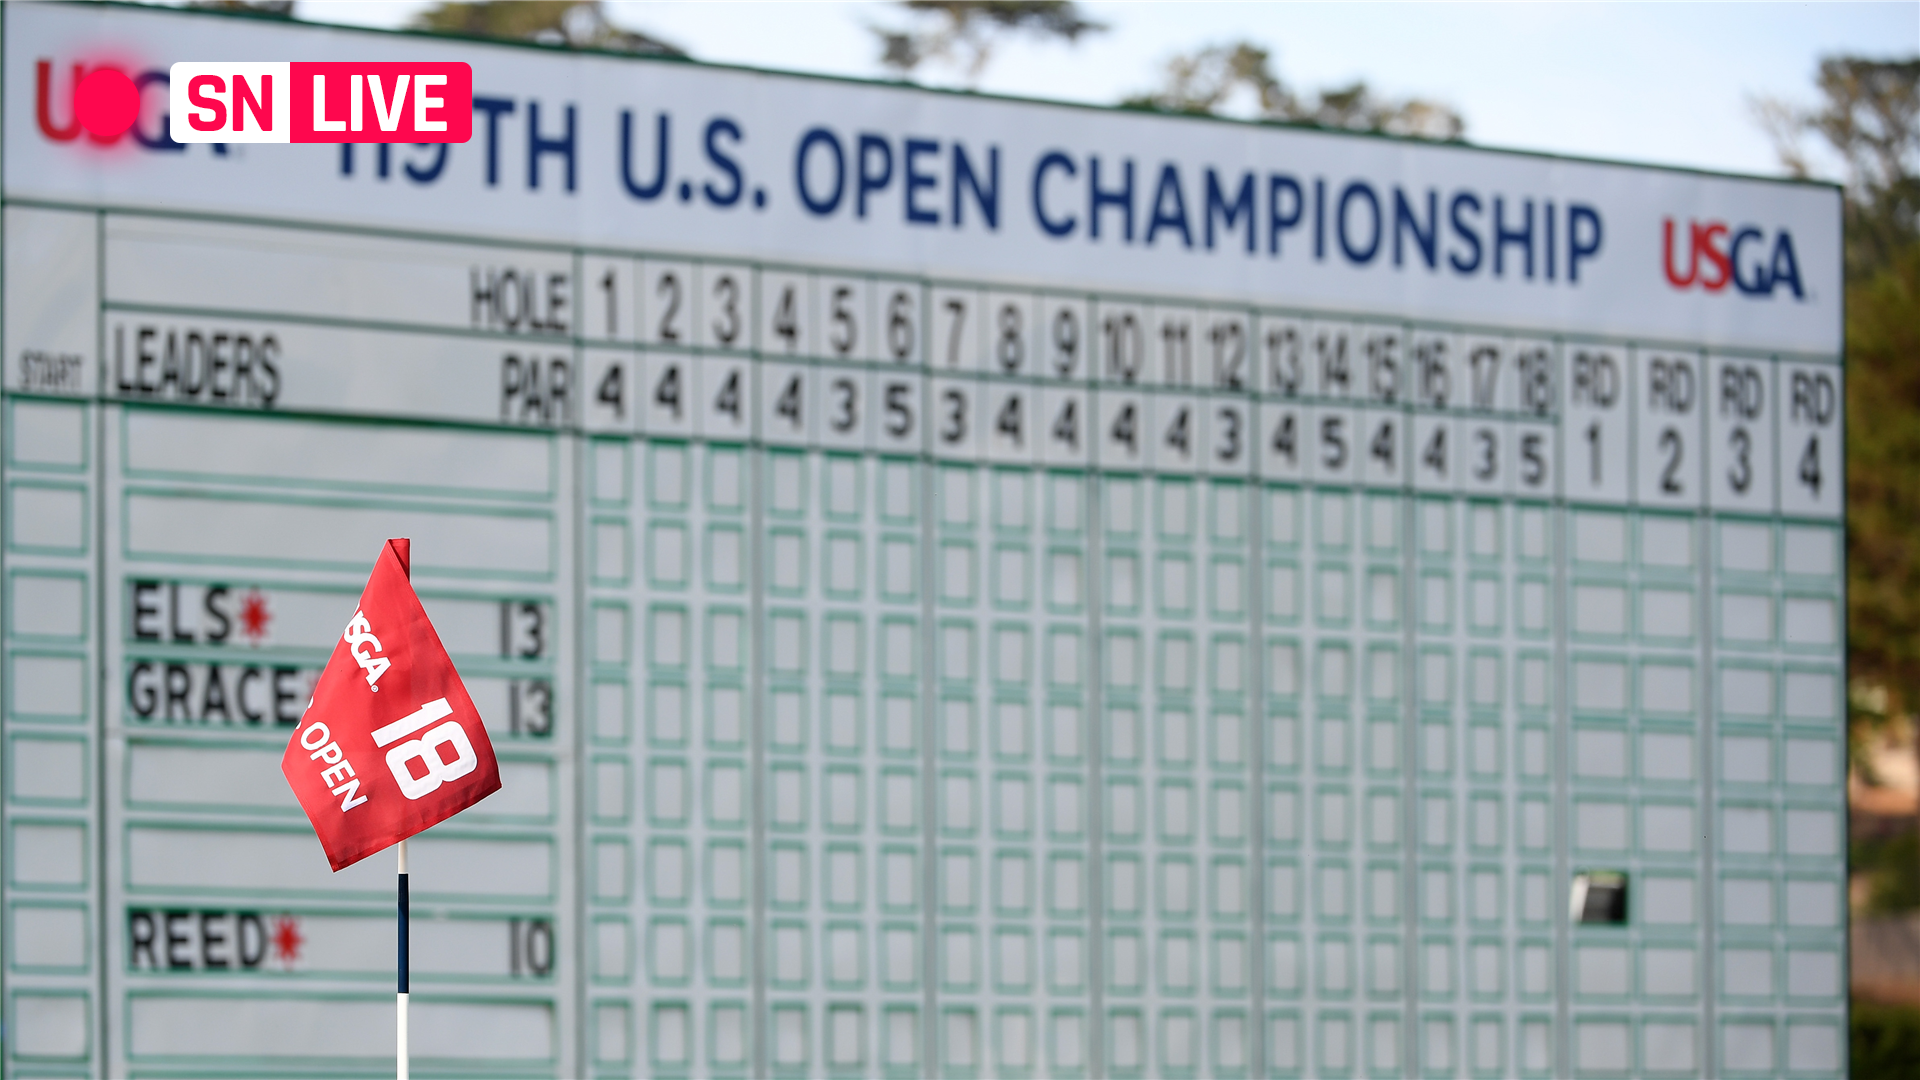 U.S. Open 2019 leaderboard: Live golf scores, results from Sunday's